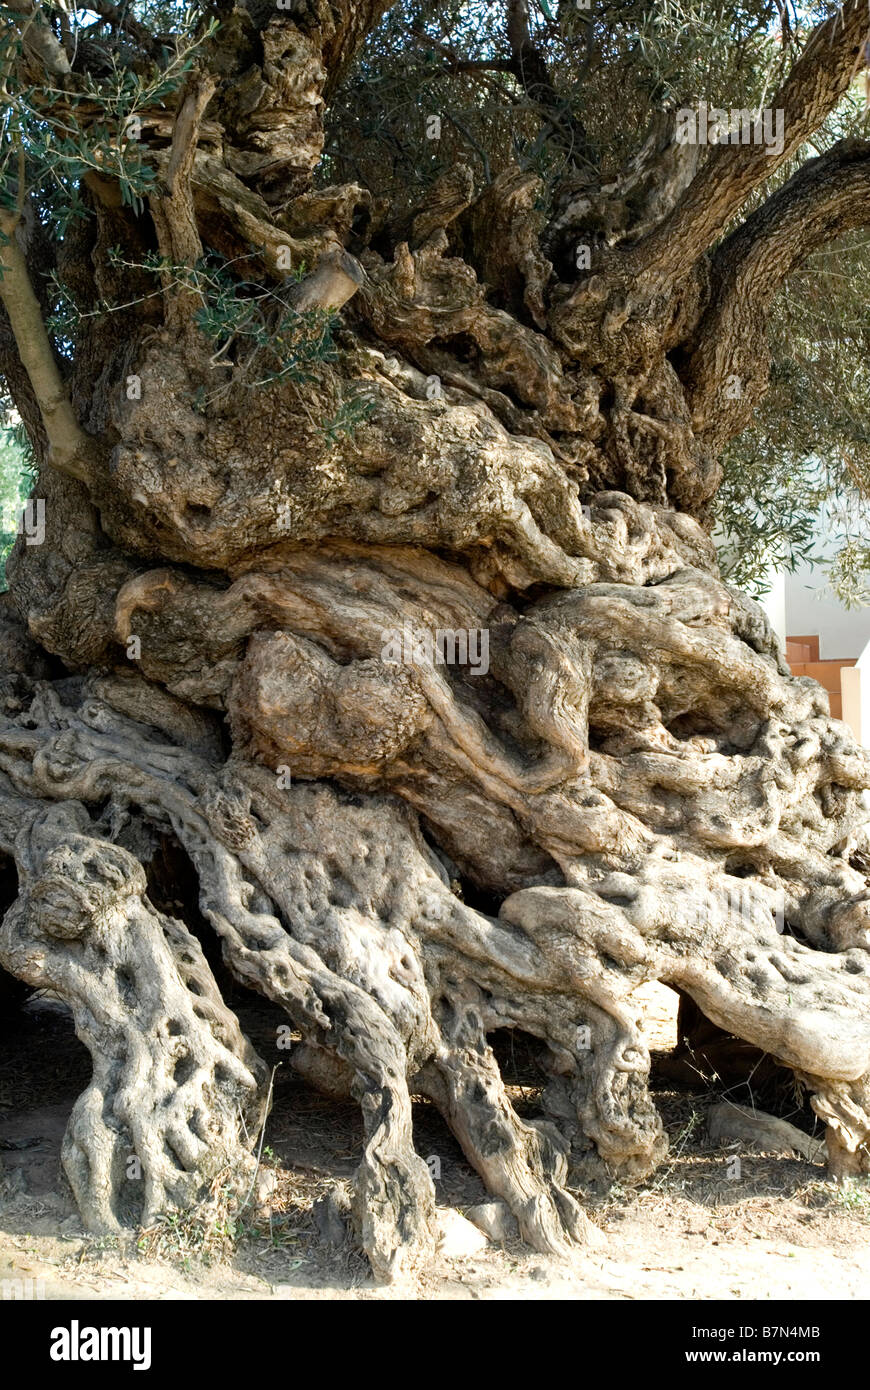 3000 year old olive tree Stock Photo